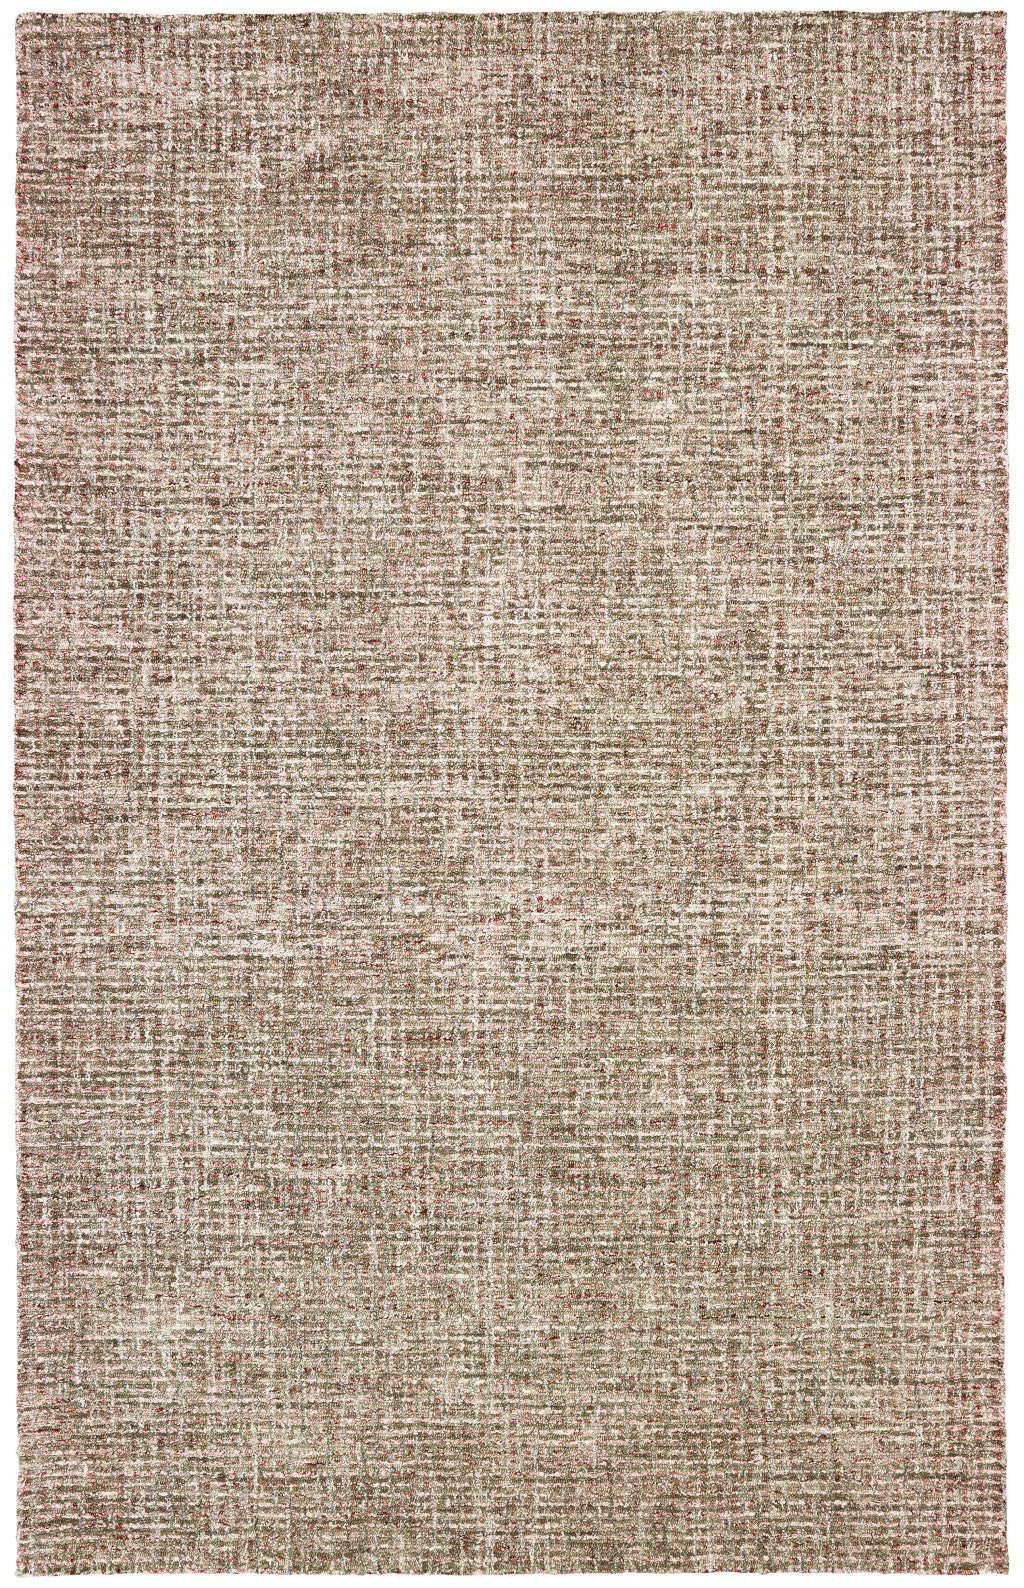 8’ x 10’ Brown Detailed Weave Area Rug